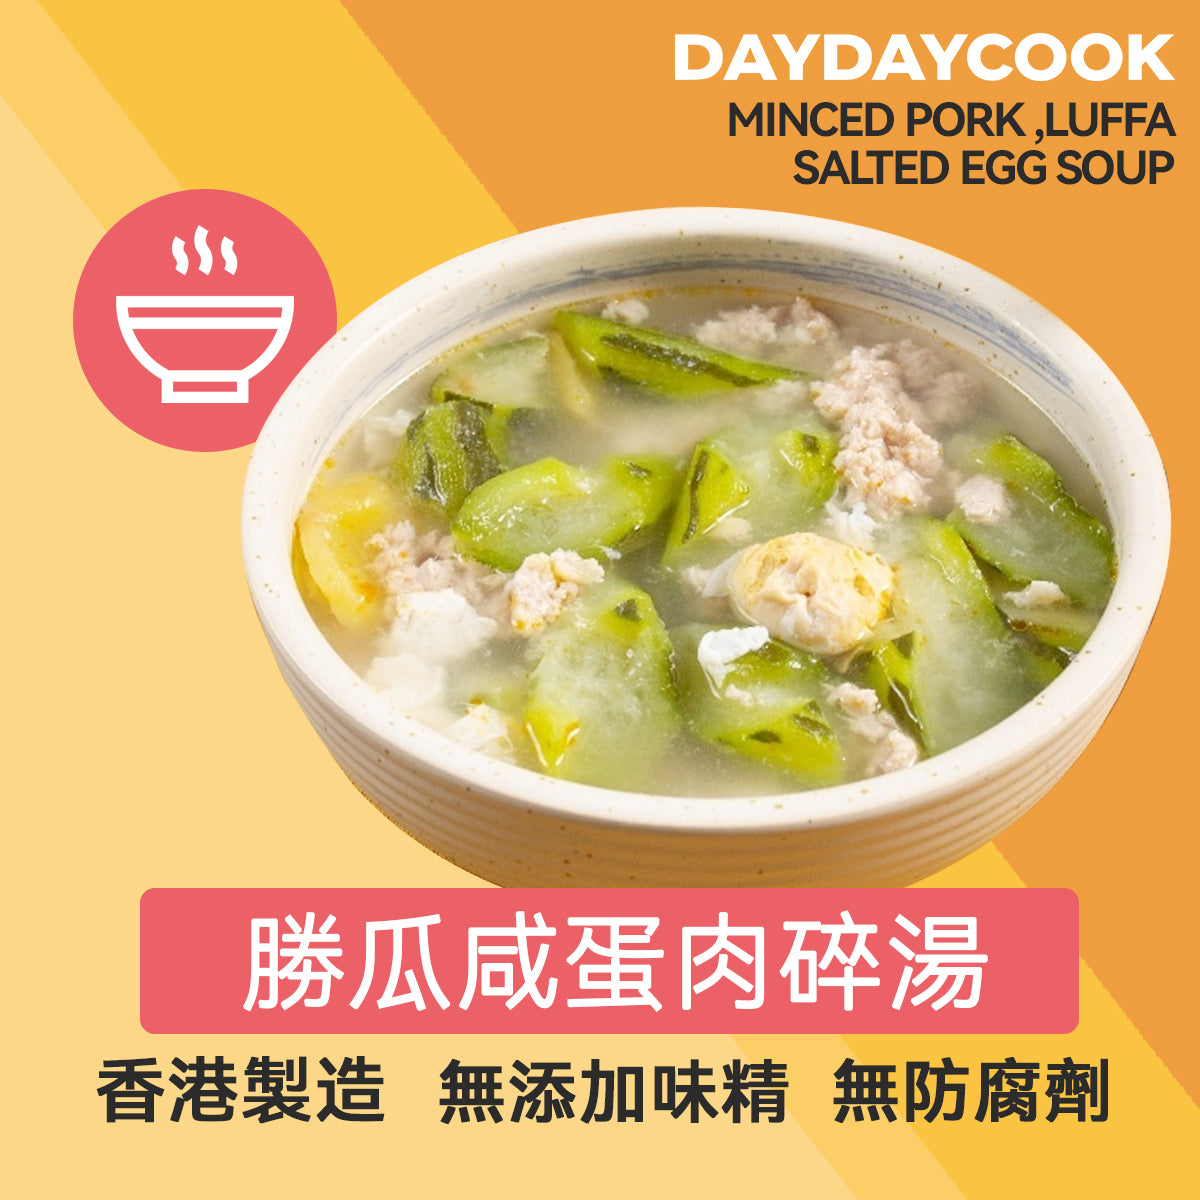 Minced Pork and Luffa Salted Egg Soup